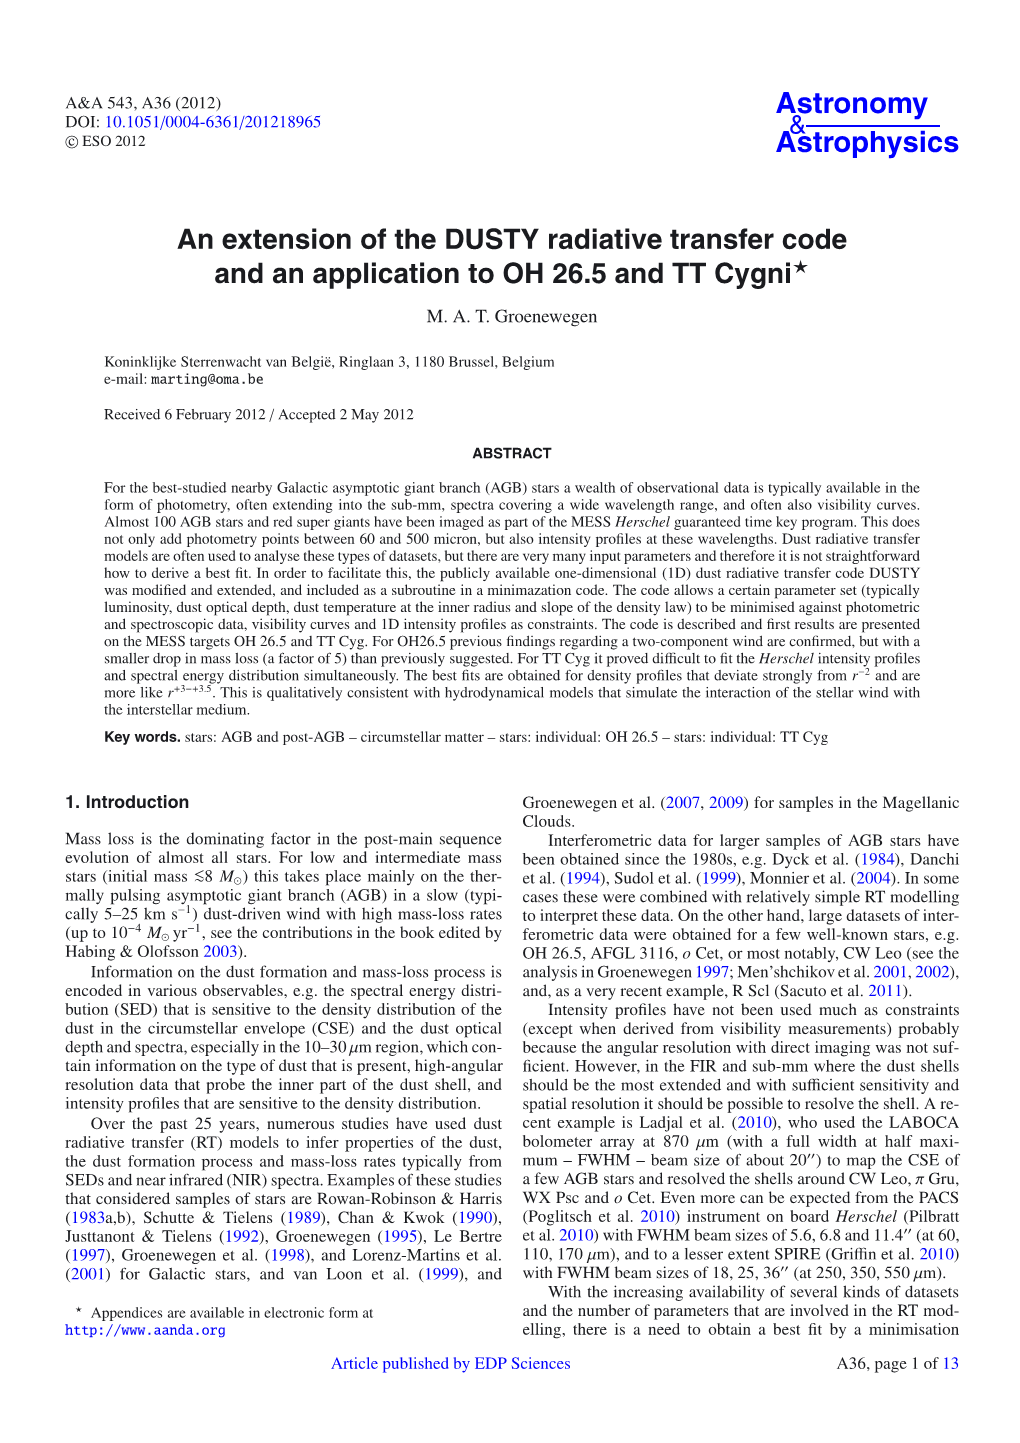 An Extension of the DUSTY Radiative Transfer Code and an Application to OH 26.5 and TT Cygni